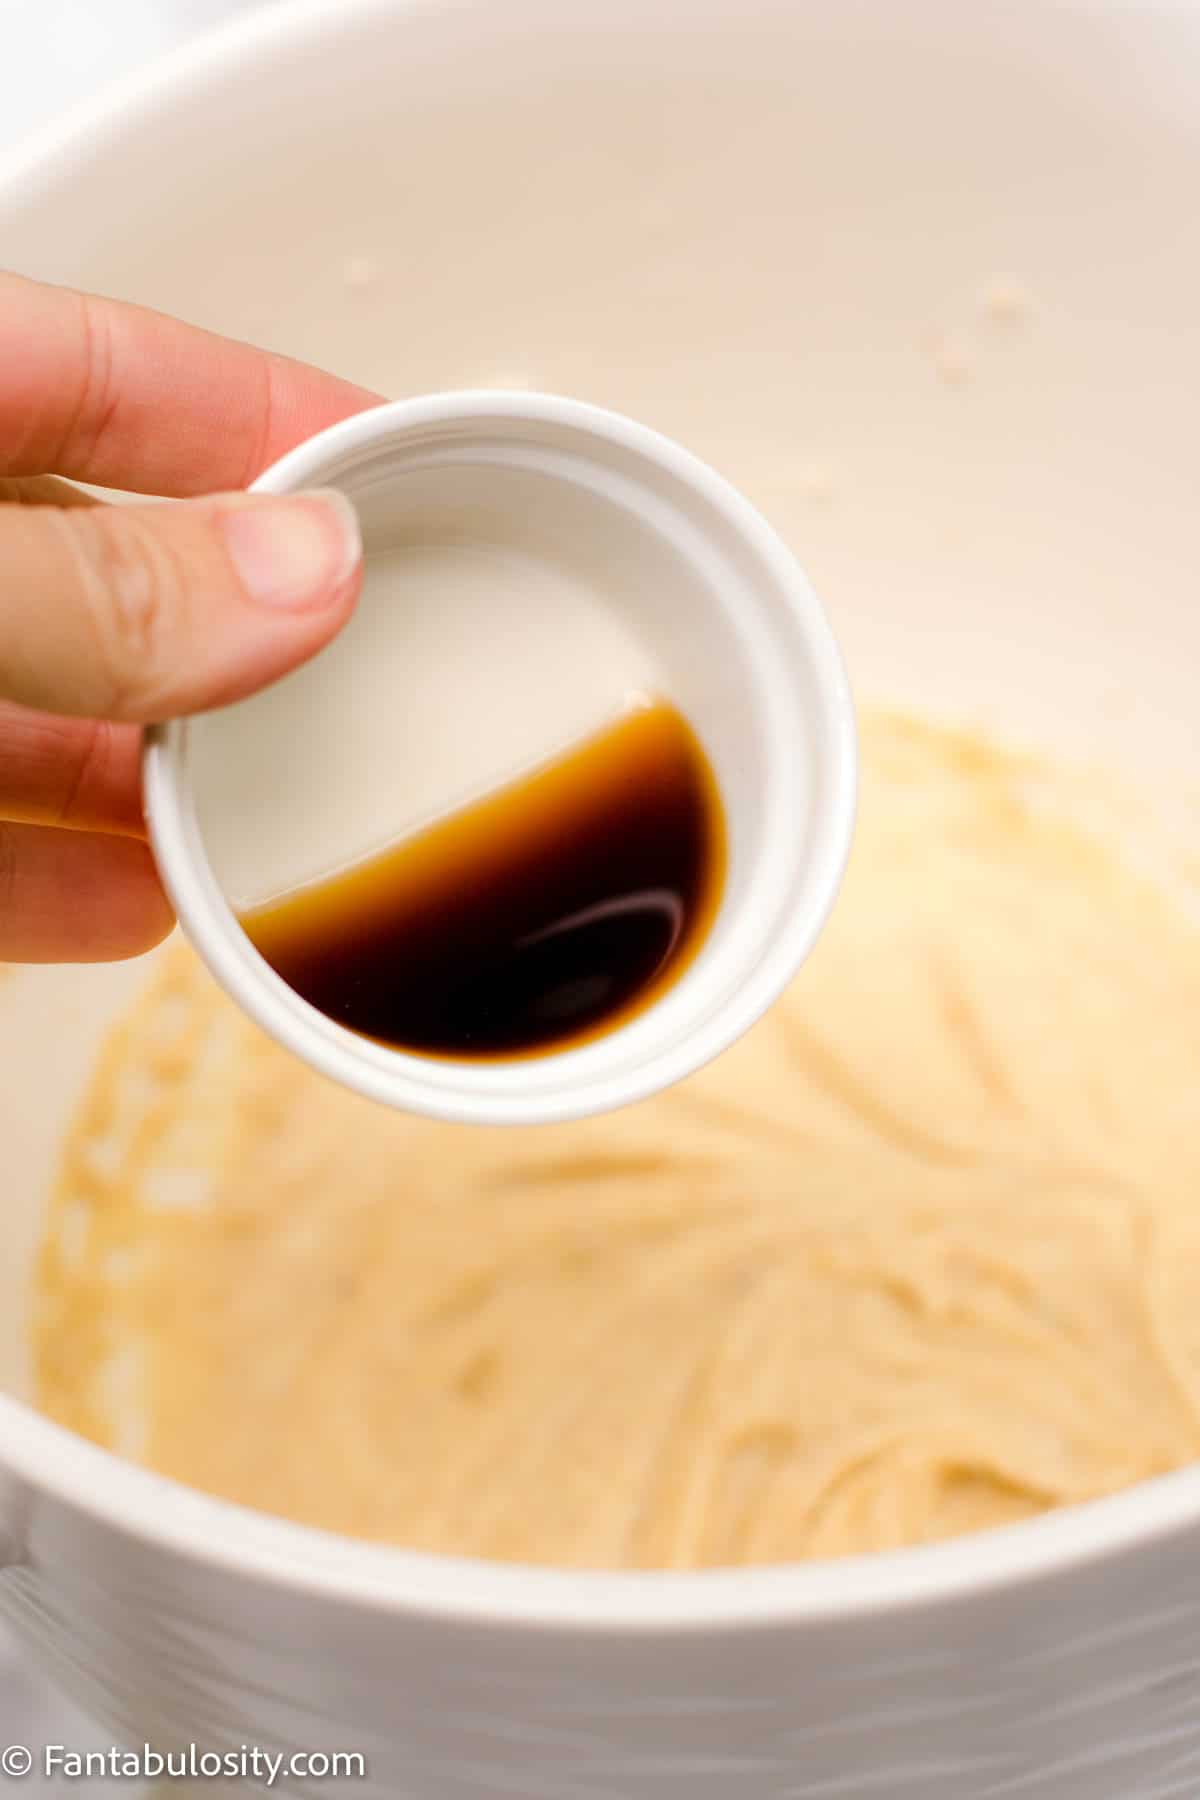 Creamed butter, sugar, and egg mixture in a bowl with someone pouring vanilla extract into the bowl.